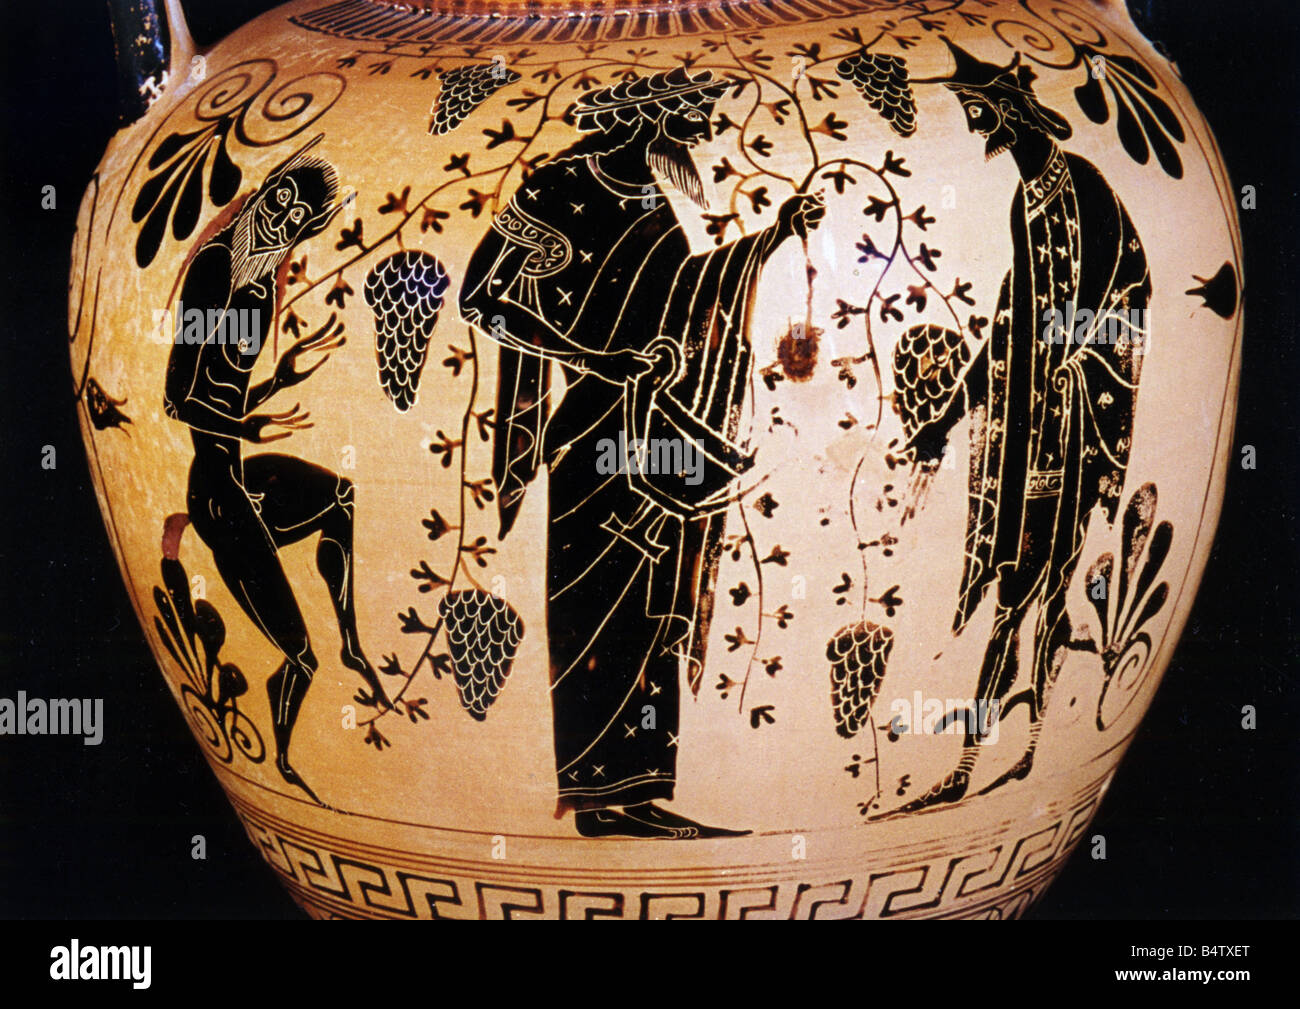 alcohol, wine, production, vintage, Attic amphora, Lysippides painter, circa 510 BC, Staatliche Antikensammlung, Munich, ancient world, antiquity, Greece, Athens, Pan, agriculture, winegrowing, harvest, winegrower, fine arts, 6th century BC, historic, historical, ancient world, people, Stock Photo